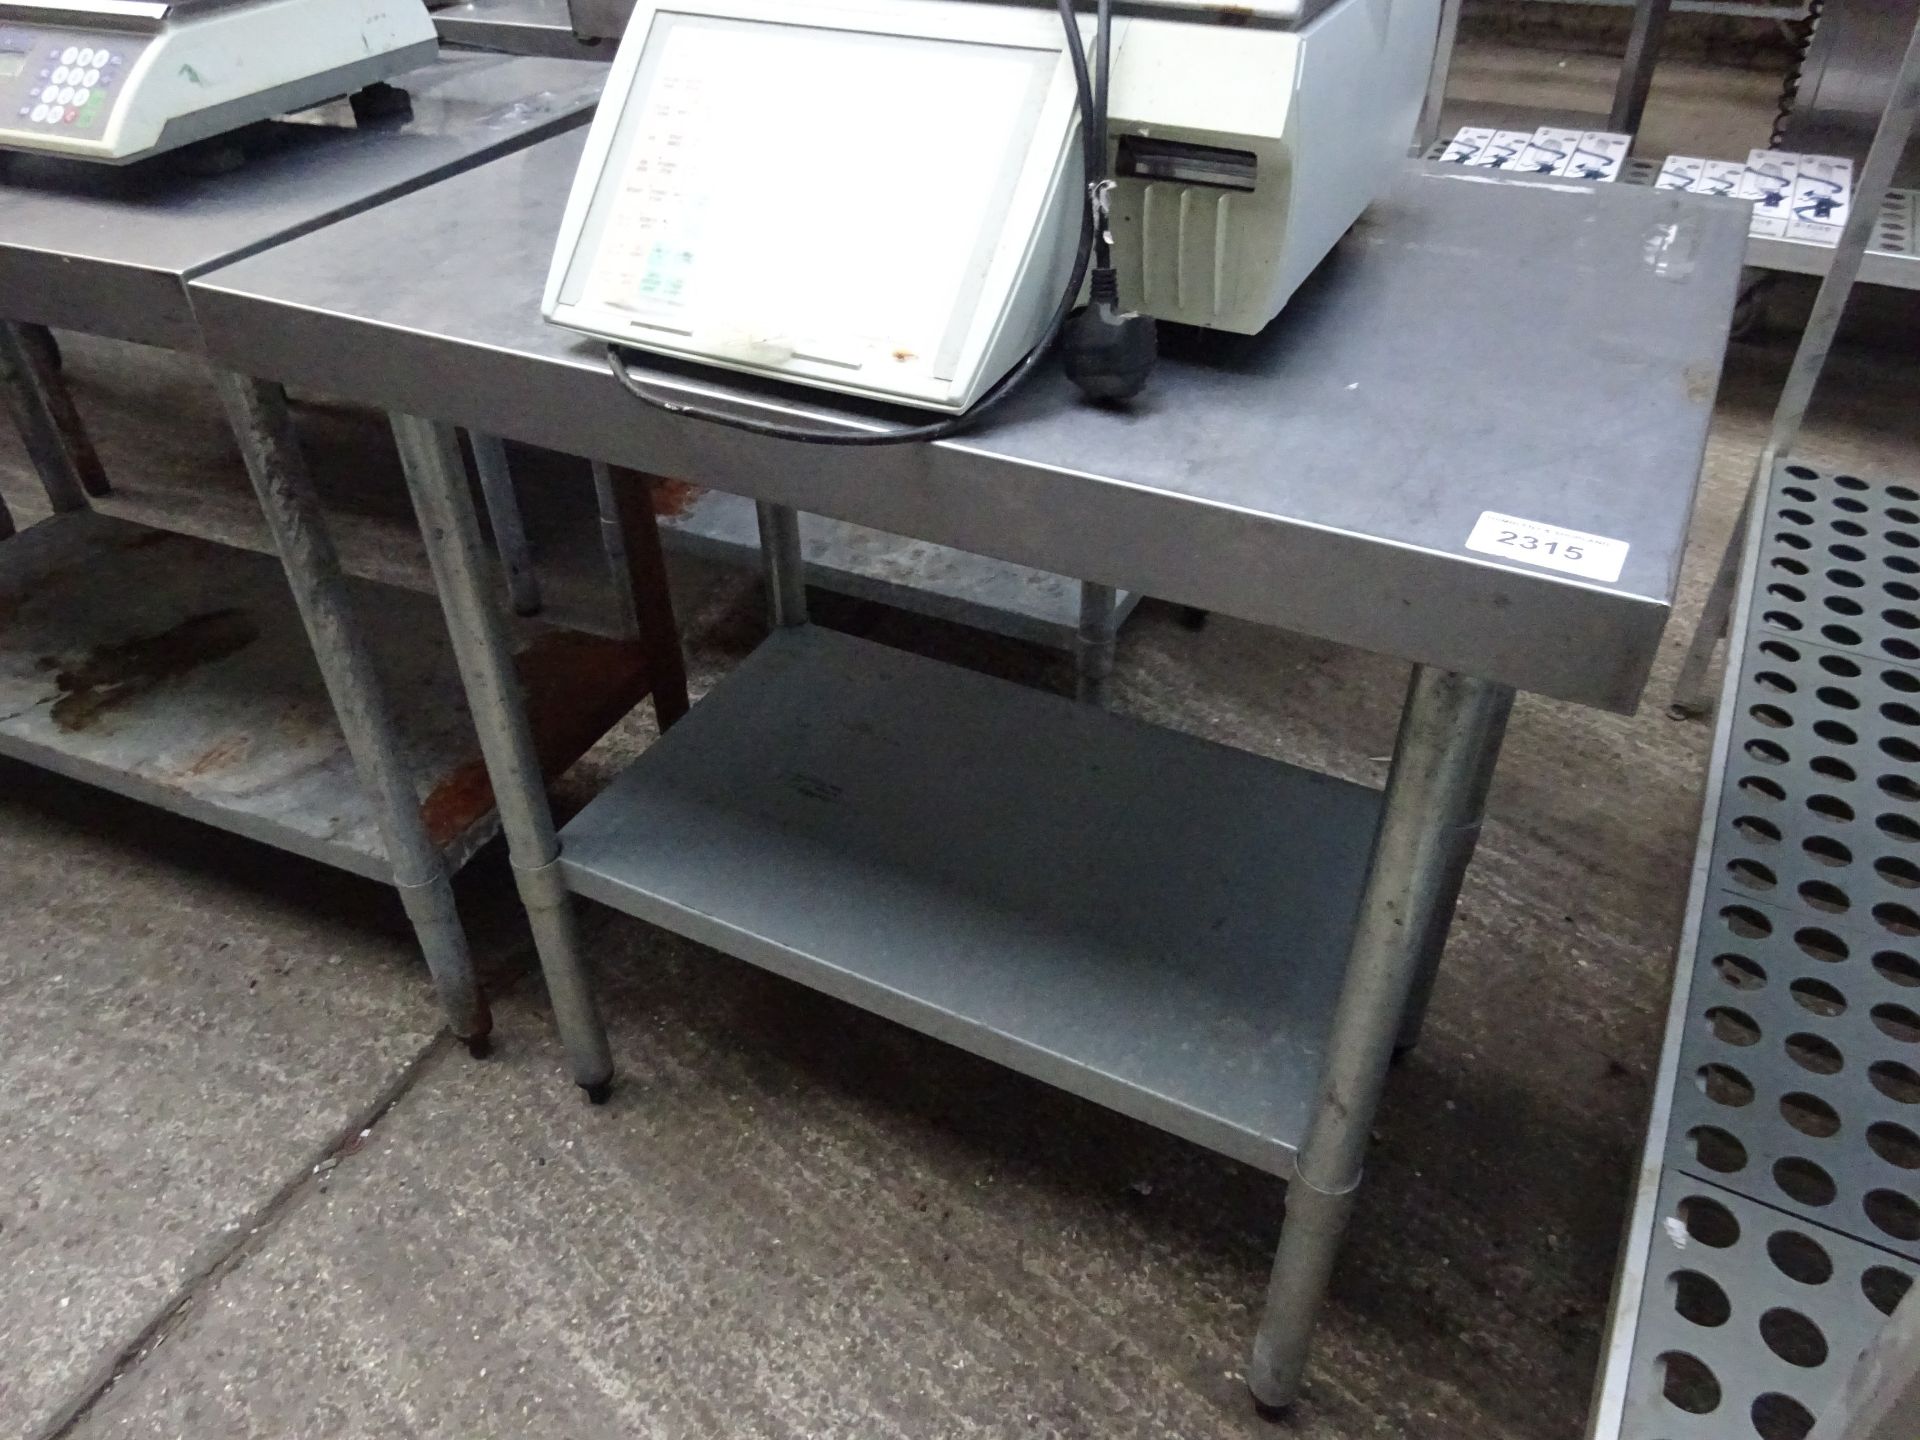 Stainless steel preparation table with under shelf, 90cms.